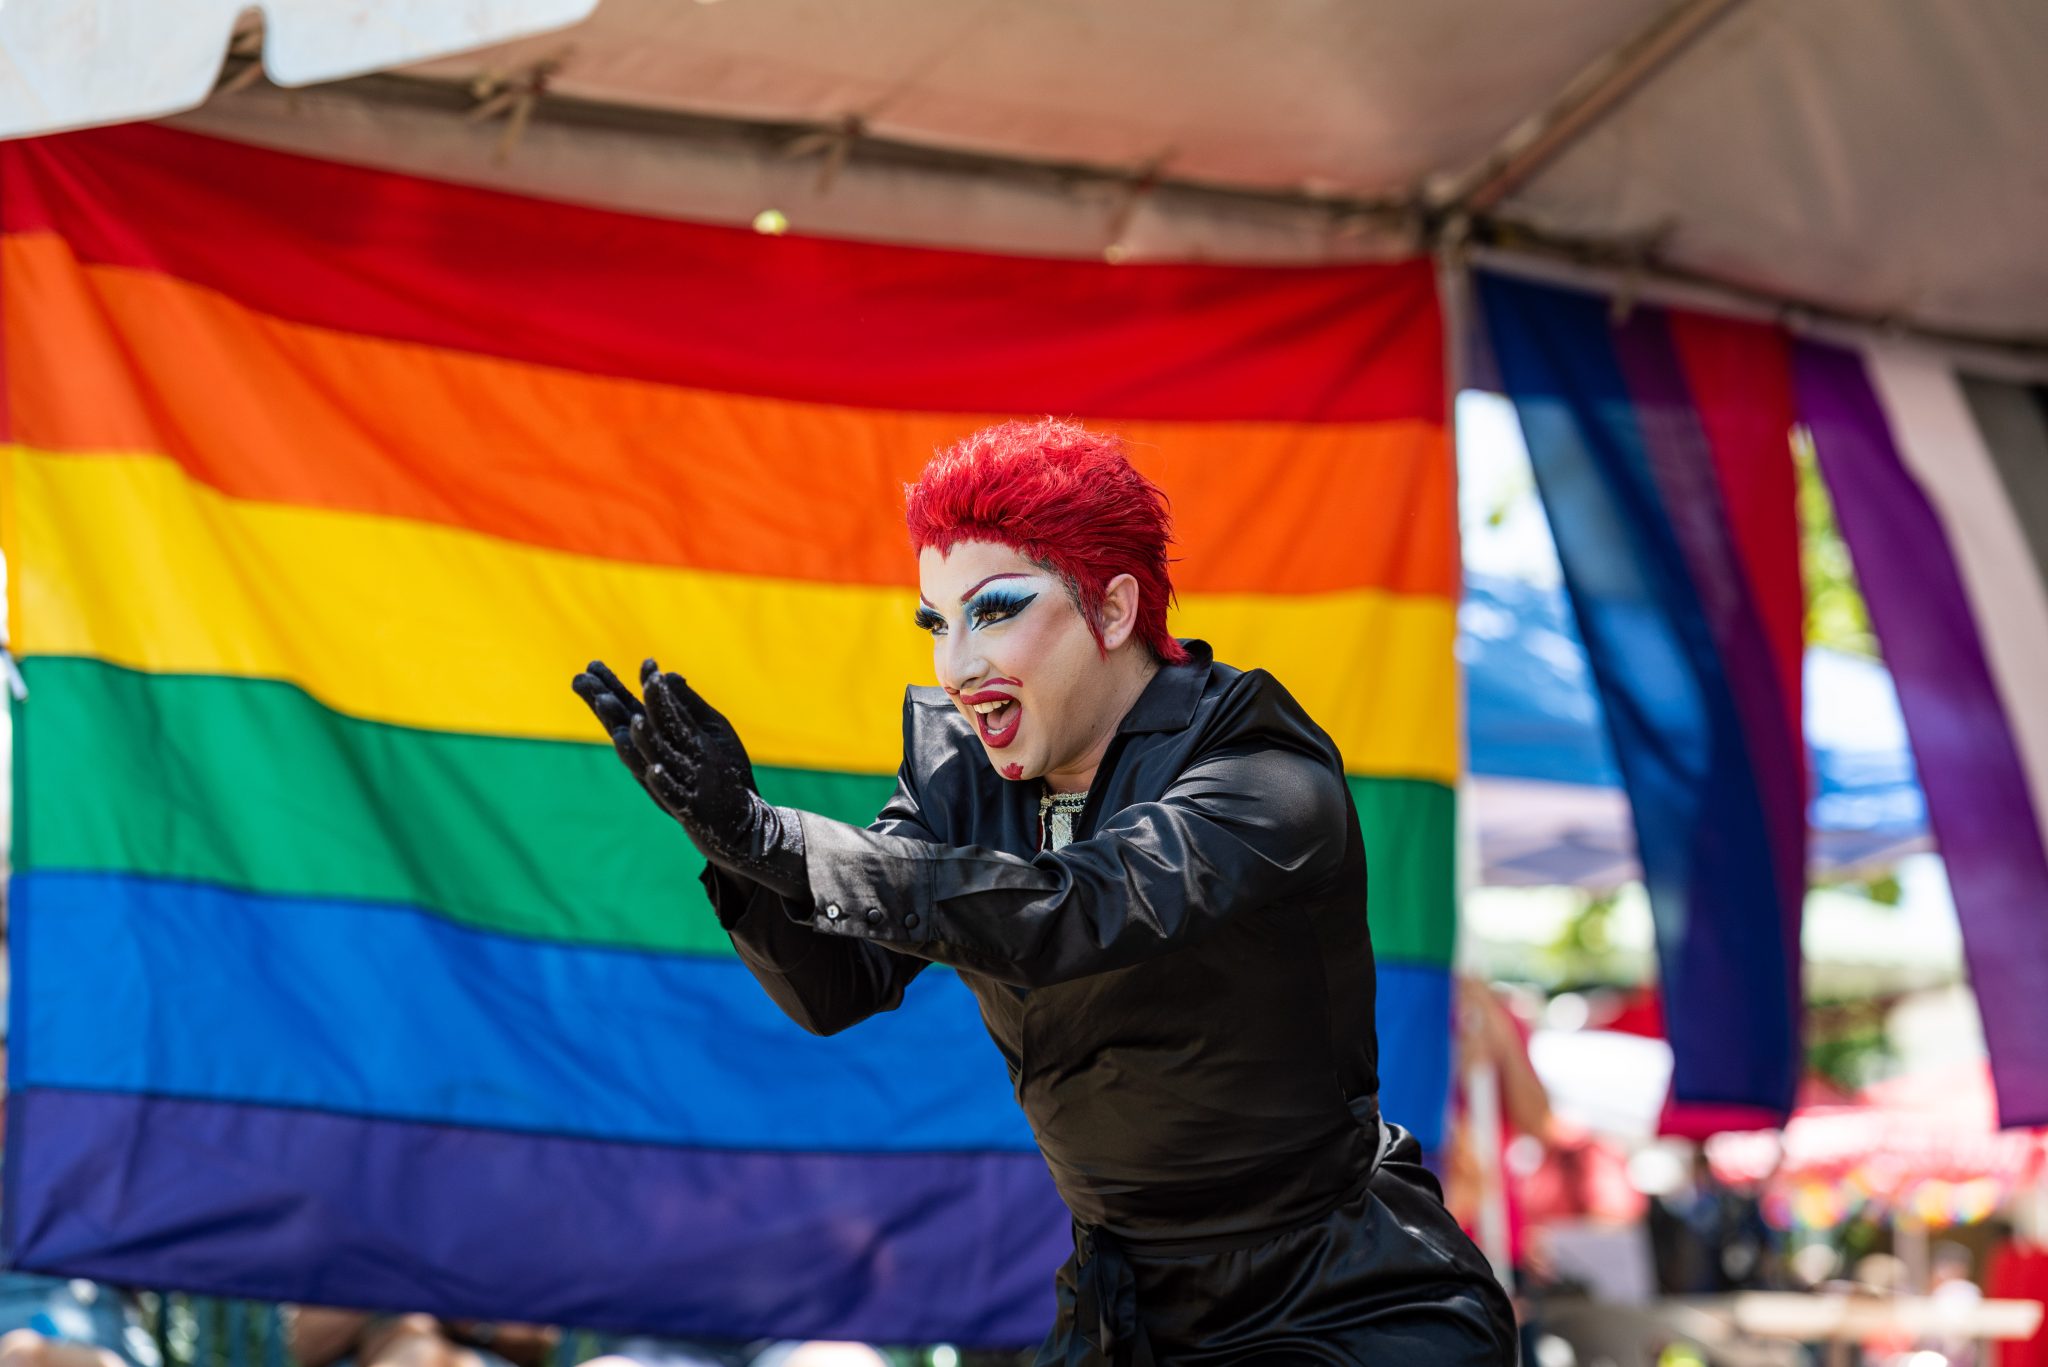 redhead tilly creams, performing, drag queen, davis pride, davis, california, pride month, gay community, event, chris allan, freelance photojournalist, news photography, lgbtq, event, colorful